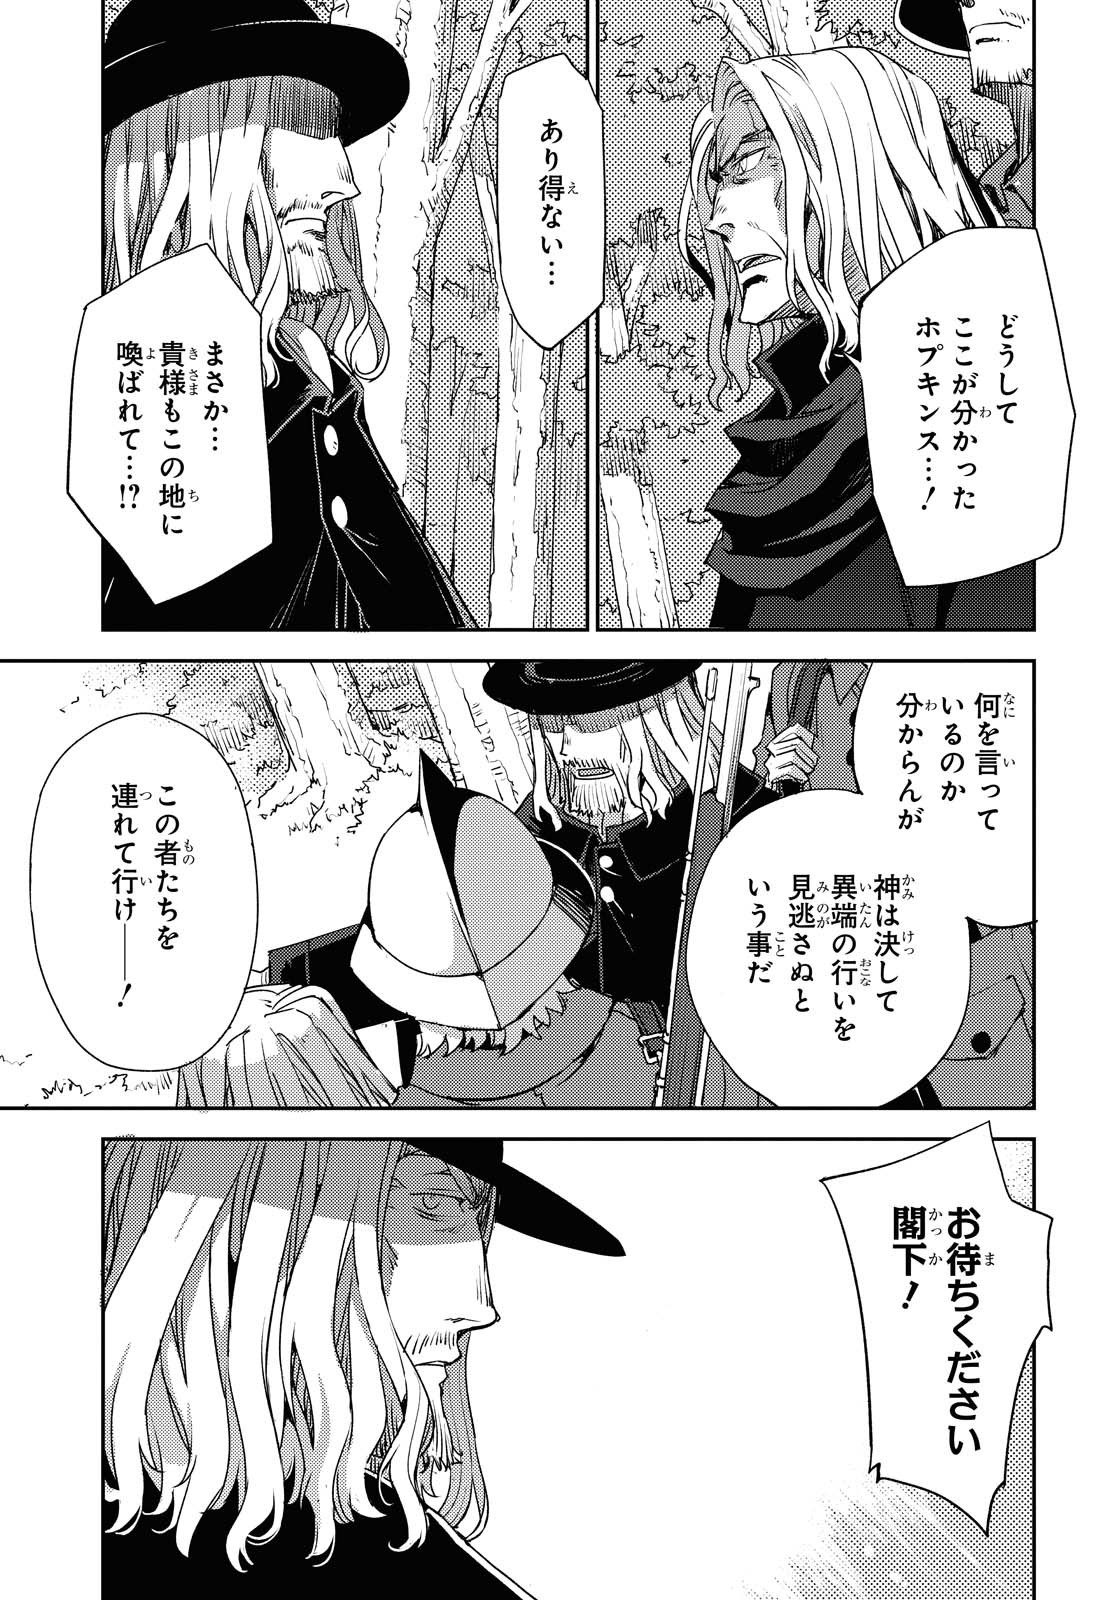 Fate/Grand Order -Epic of Remnant- 亜種特異点IV 禁忌降臨庭園 セイレム 異端なるセイレム 第23話 - Page 5